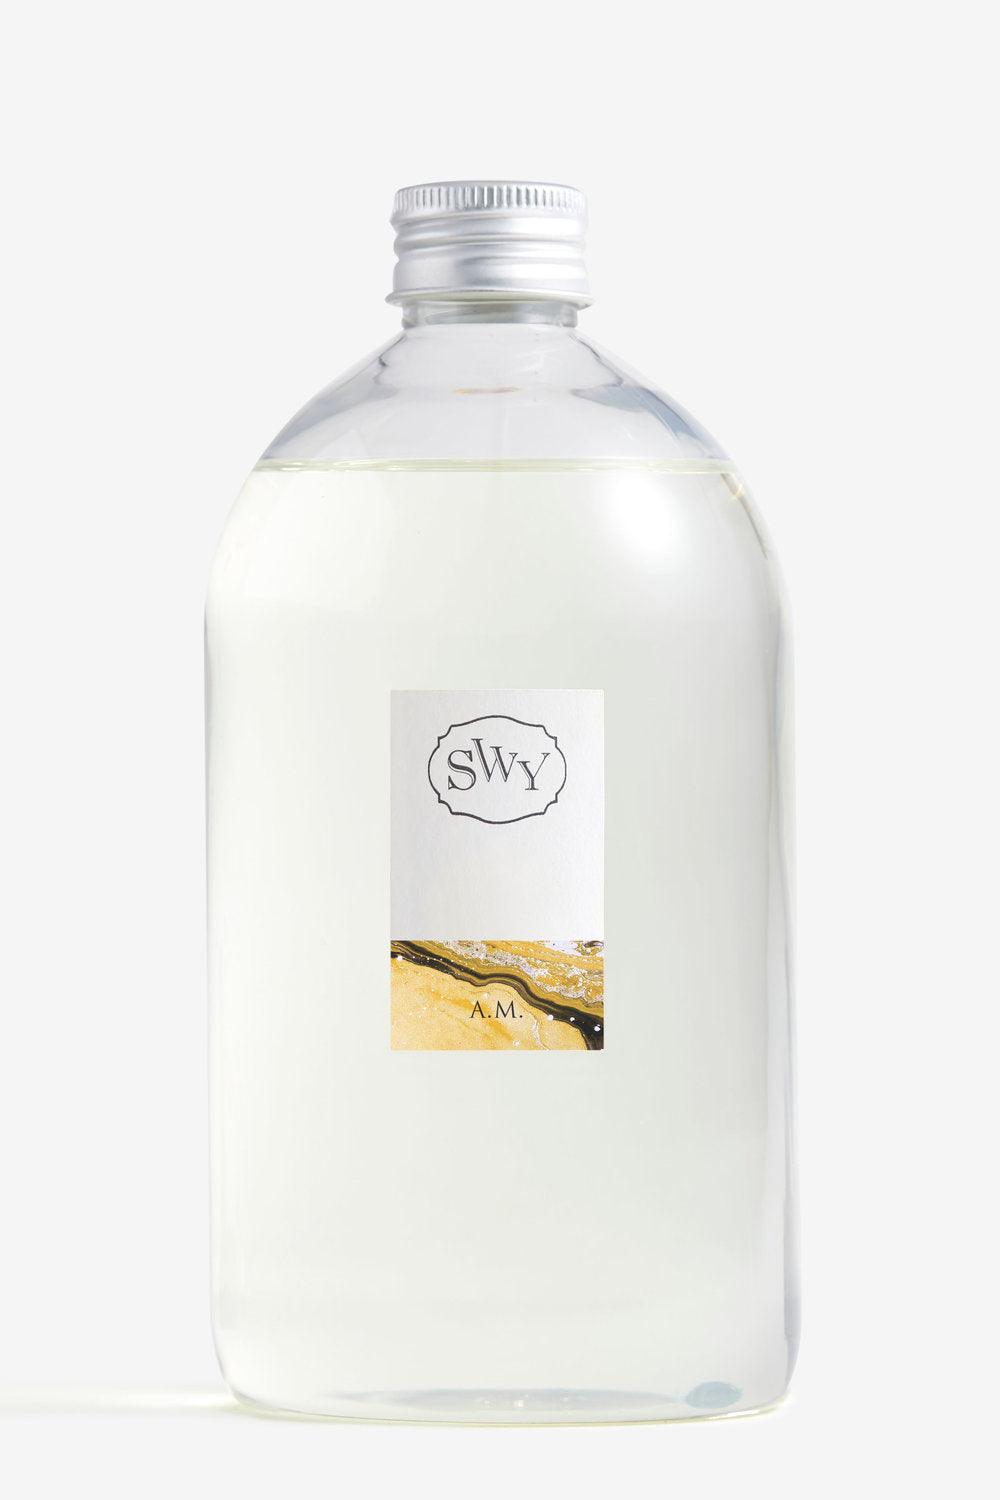 Reeds Diffuser – A.M. - SWY - Scent With You